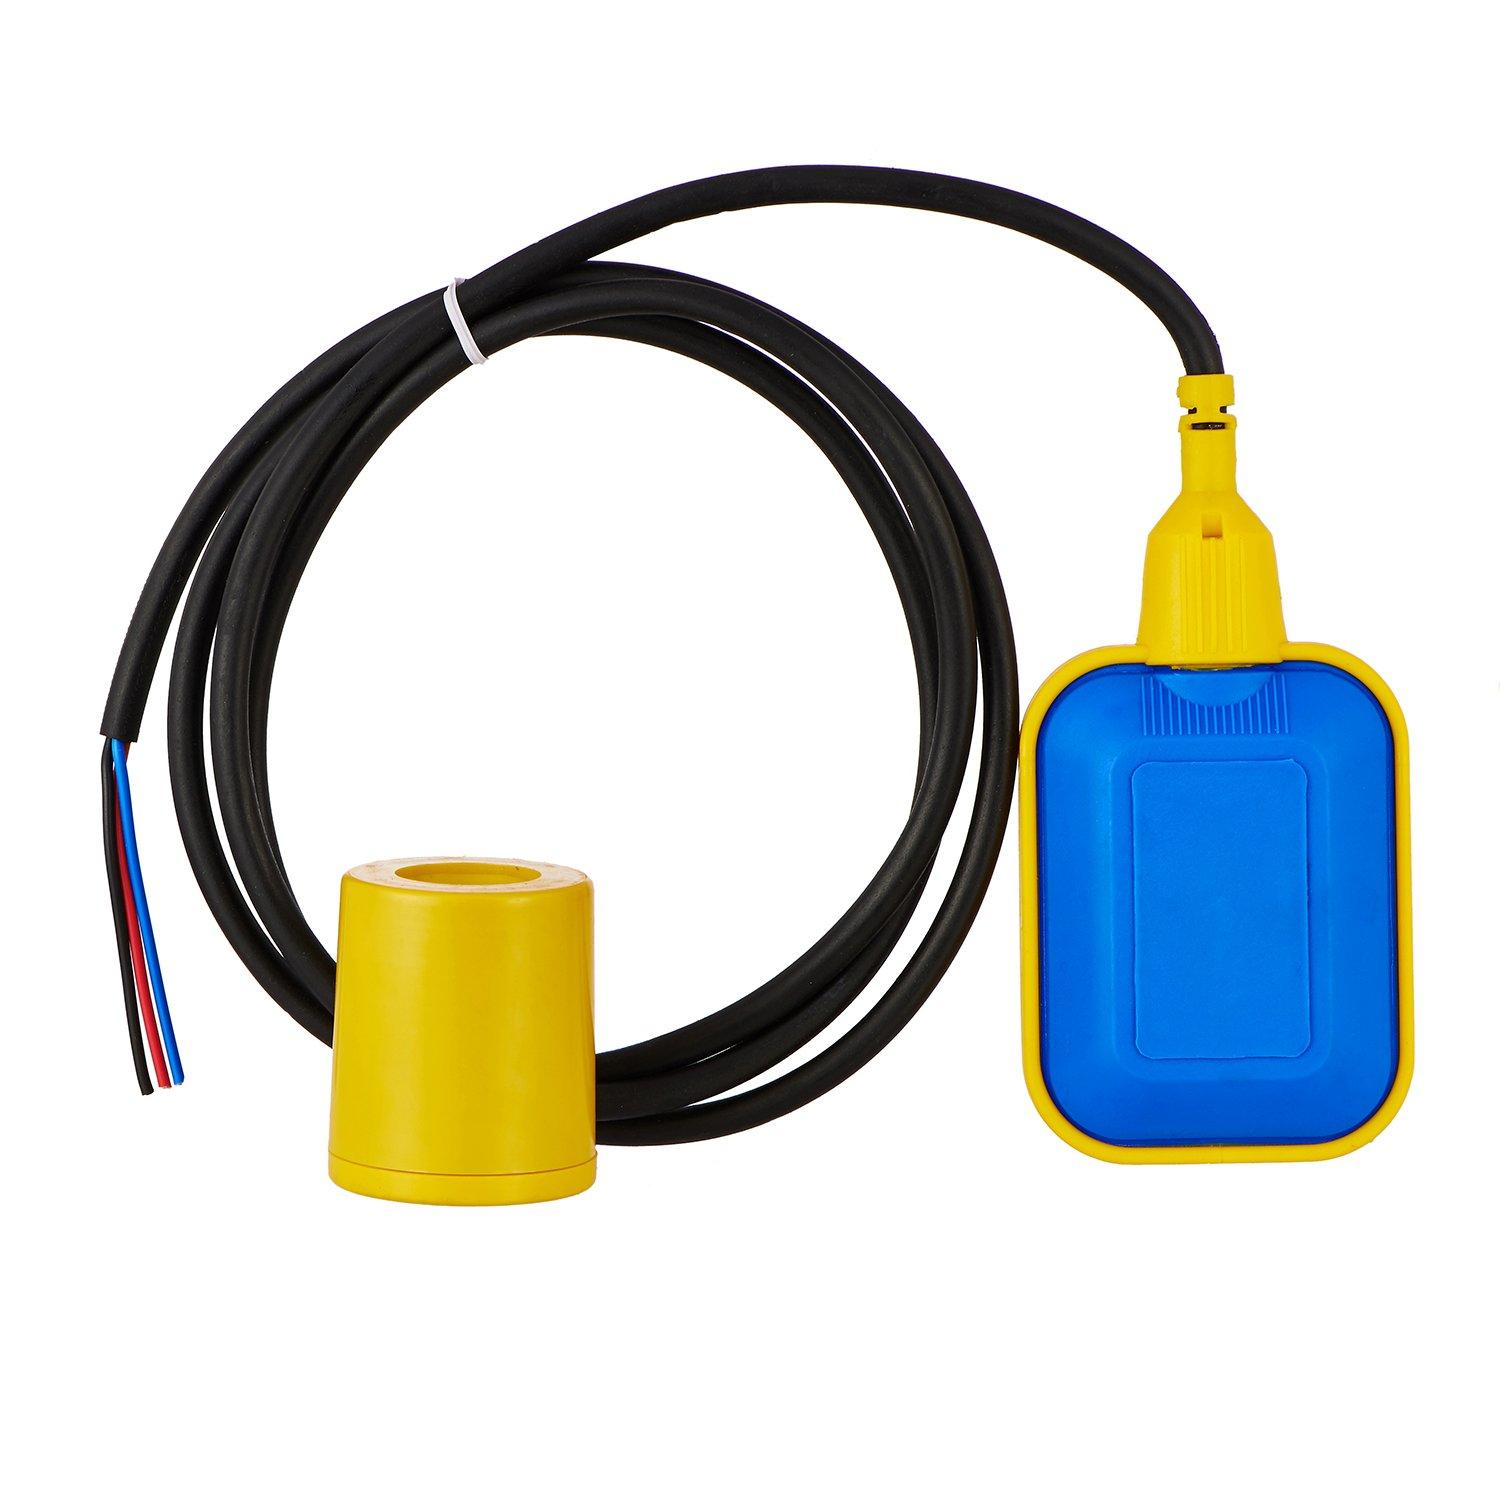 Buy Top Mounted Float Level Switch online at best rates in India